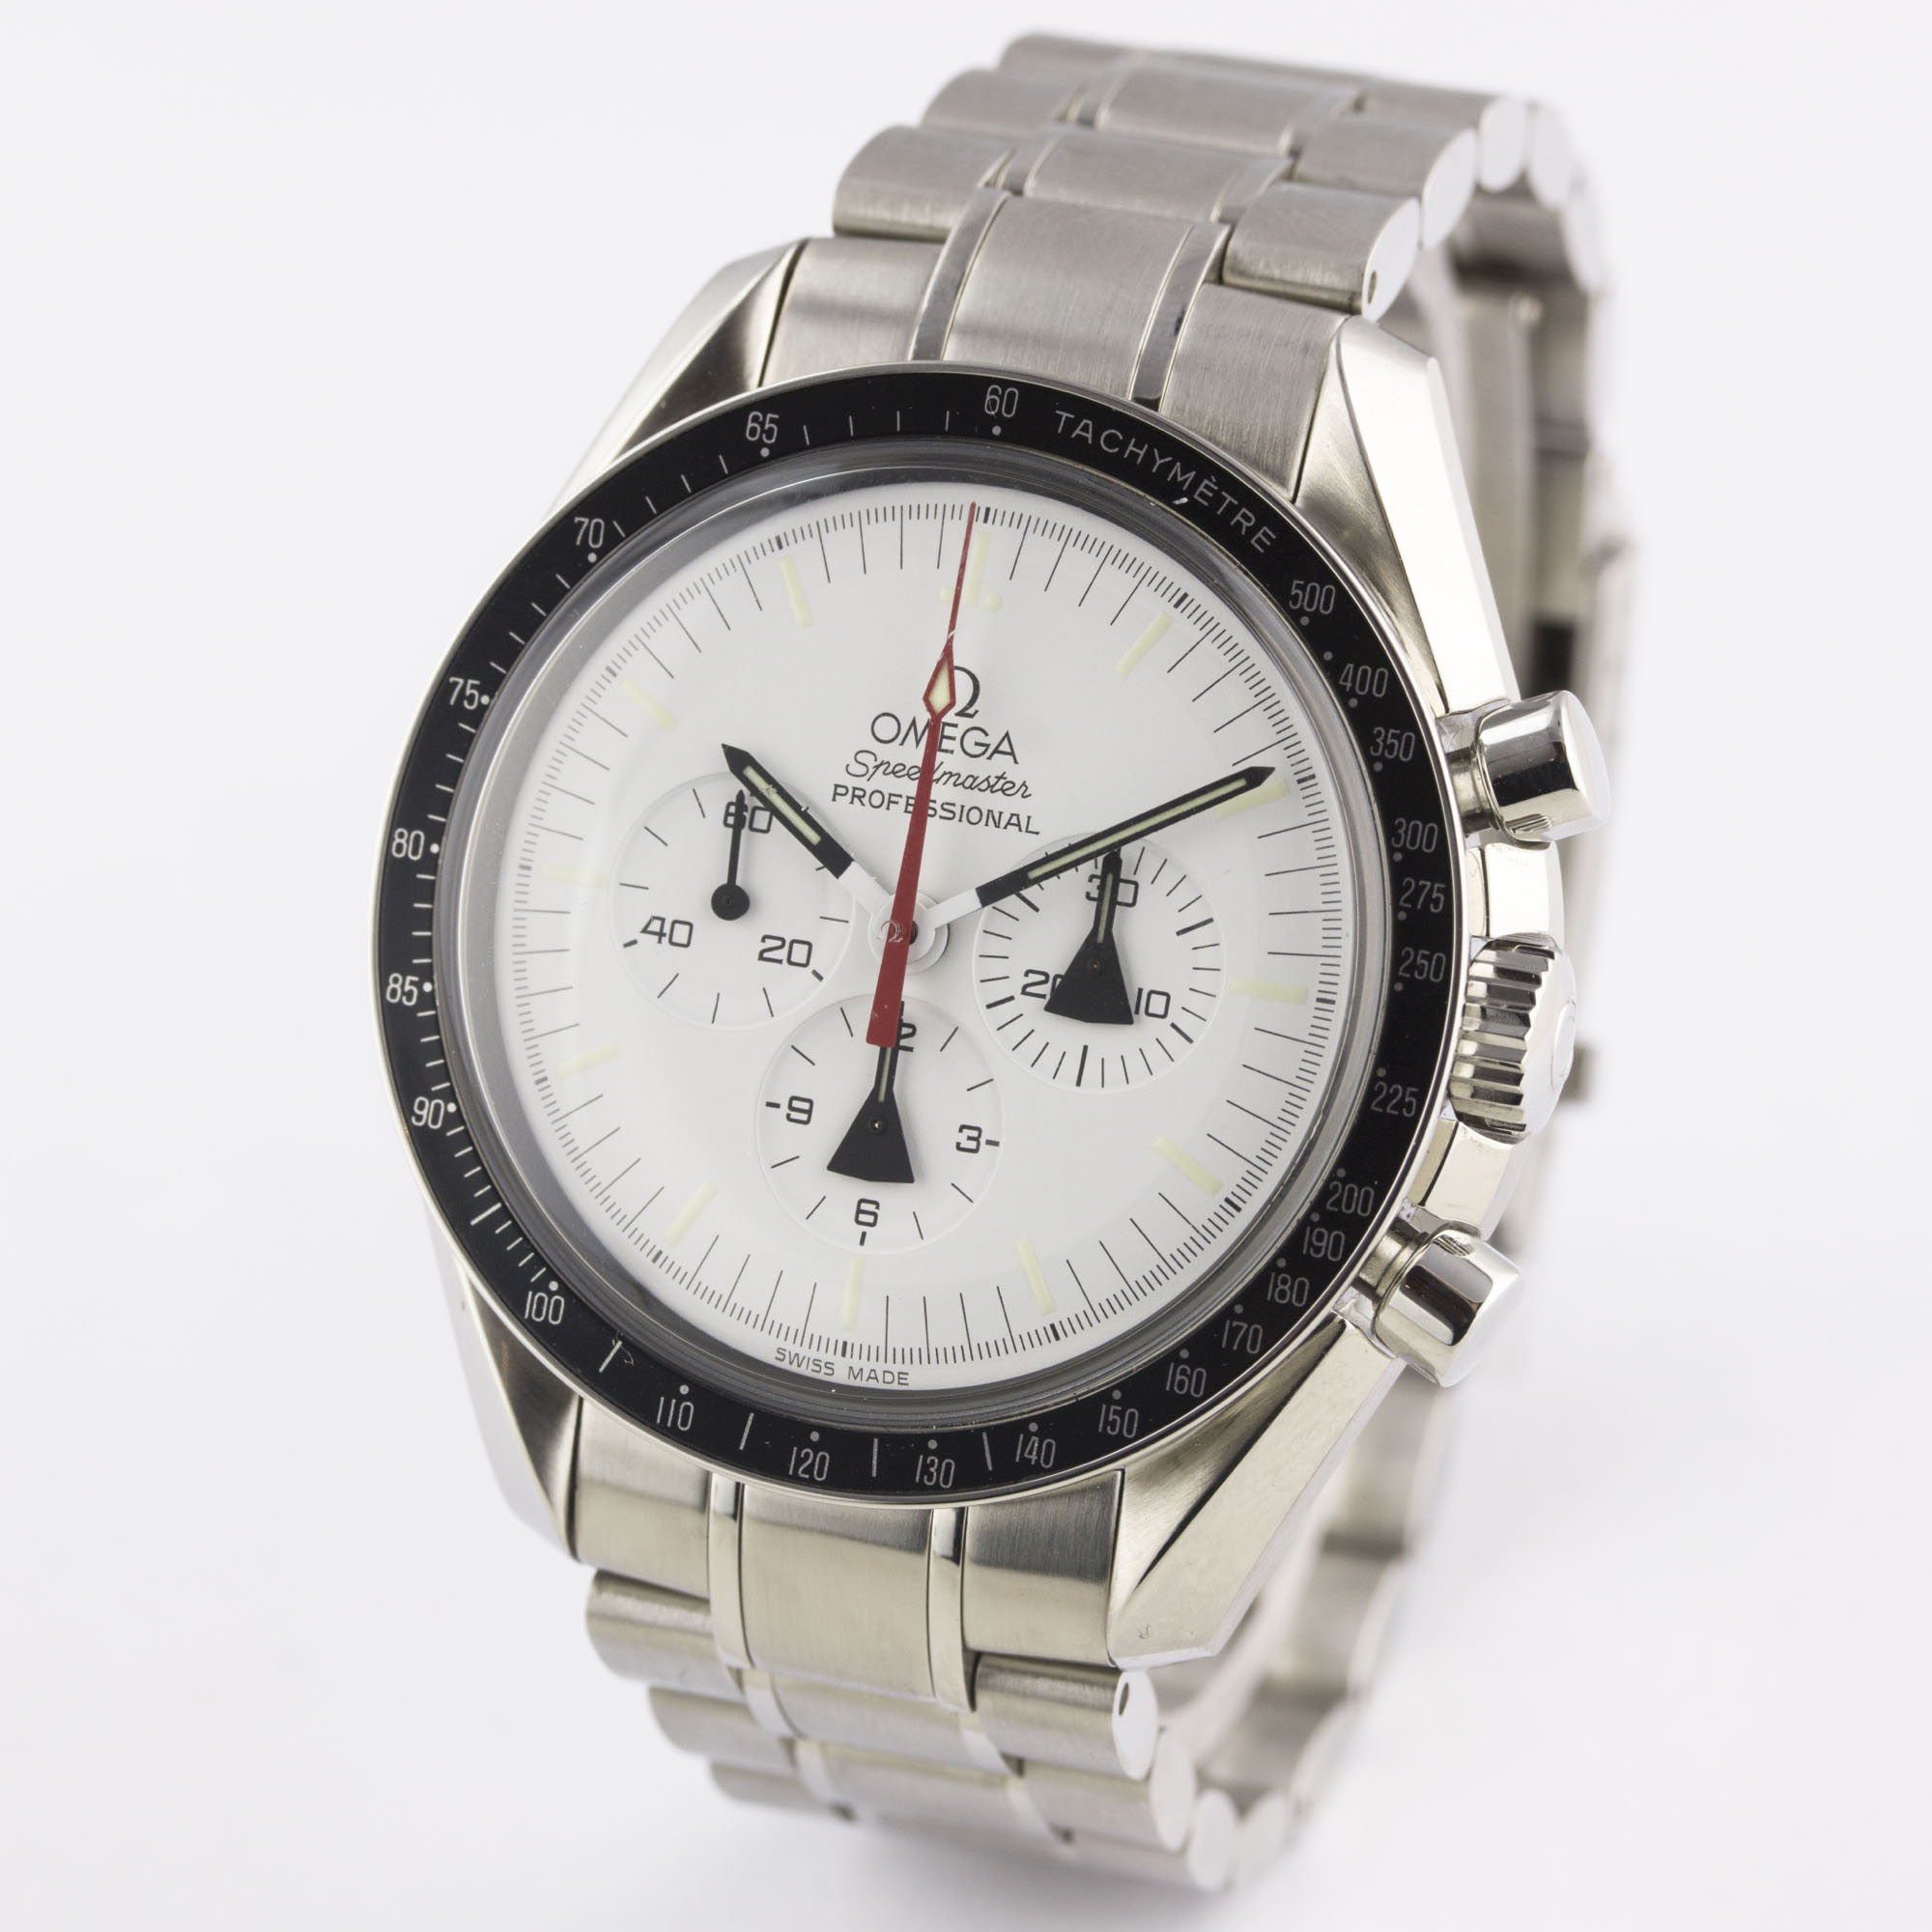 A RARE GENTLEMAN'S STAINLESS STEEL OMEGA SPEEDMASTER PROFESSIONAL "ALASKA PROJECT" CHRONOGRAPH - Image 5 of 10